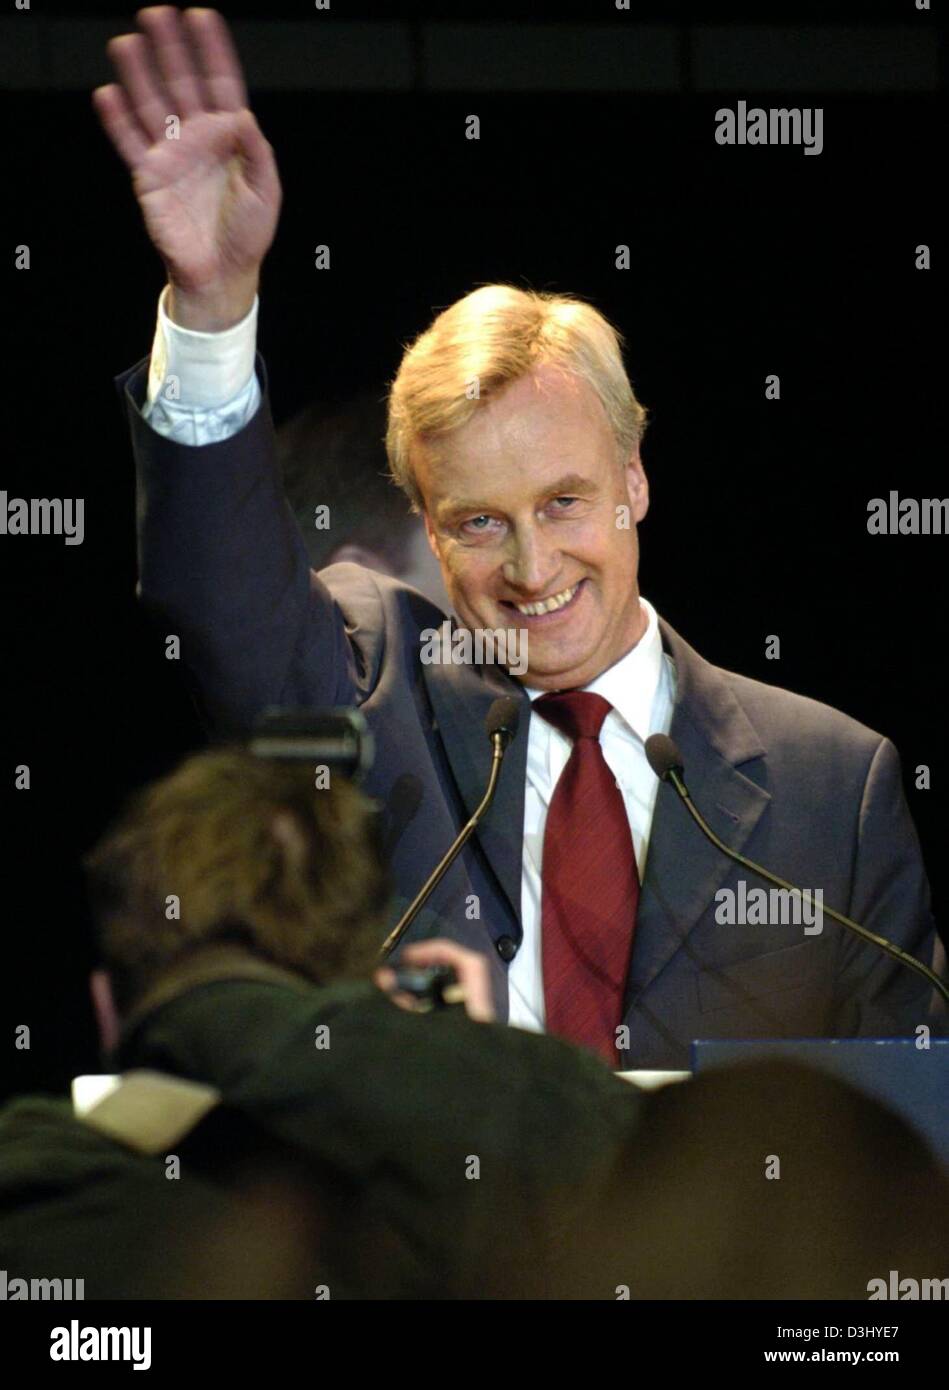 (dpa) - Hamburg's mayor Ole von Beust (CDU) waves his hand and smiles during an election party in Hamburg, Germany, 29 February 2004. With a record increase of 21 percentage points von Beust managed to win the election and the sole government for the CDU in Hamburg. According to the preliminary results the CDU won with a majority of 47,2 percent of votes, in comparison to the 2001  Stock Photo